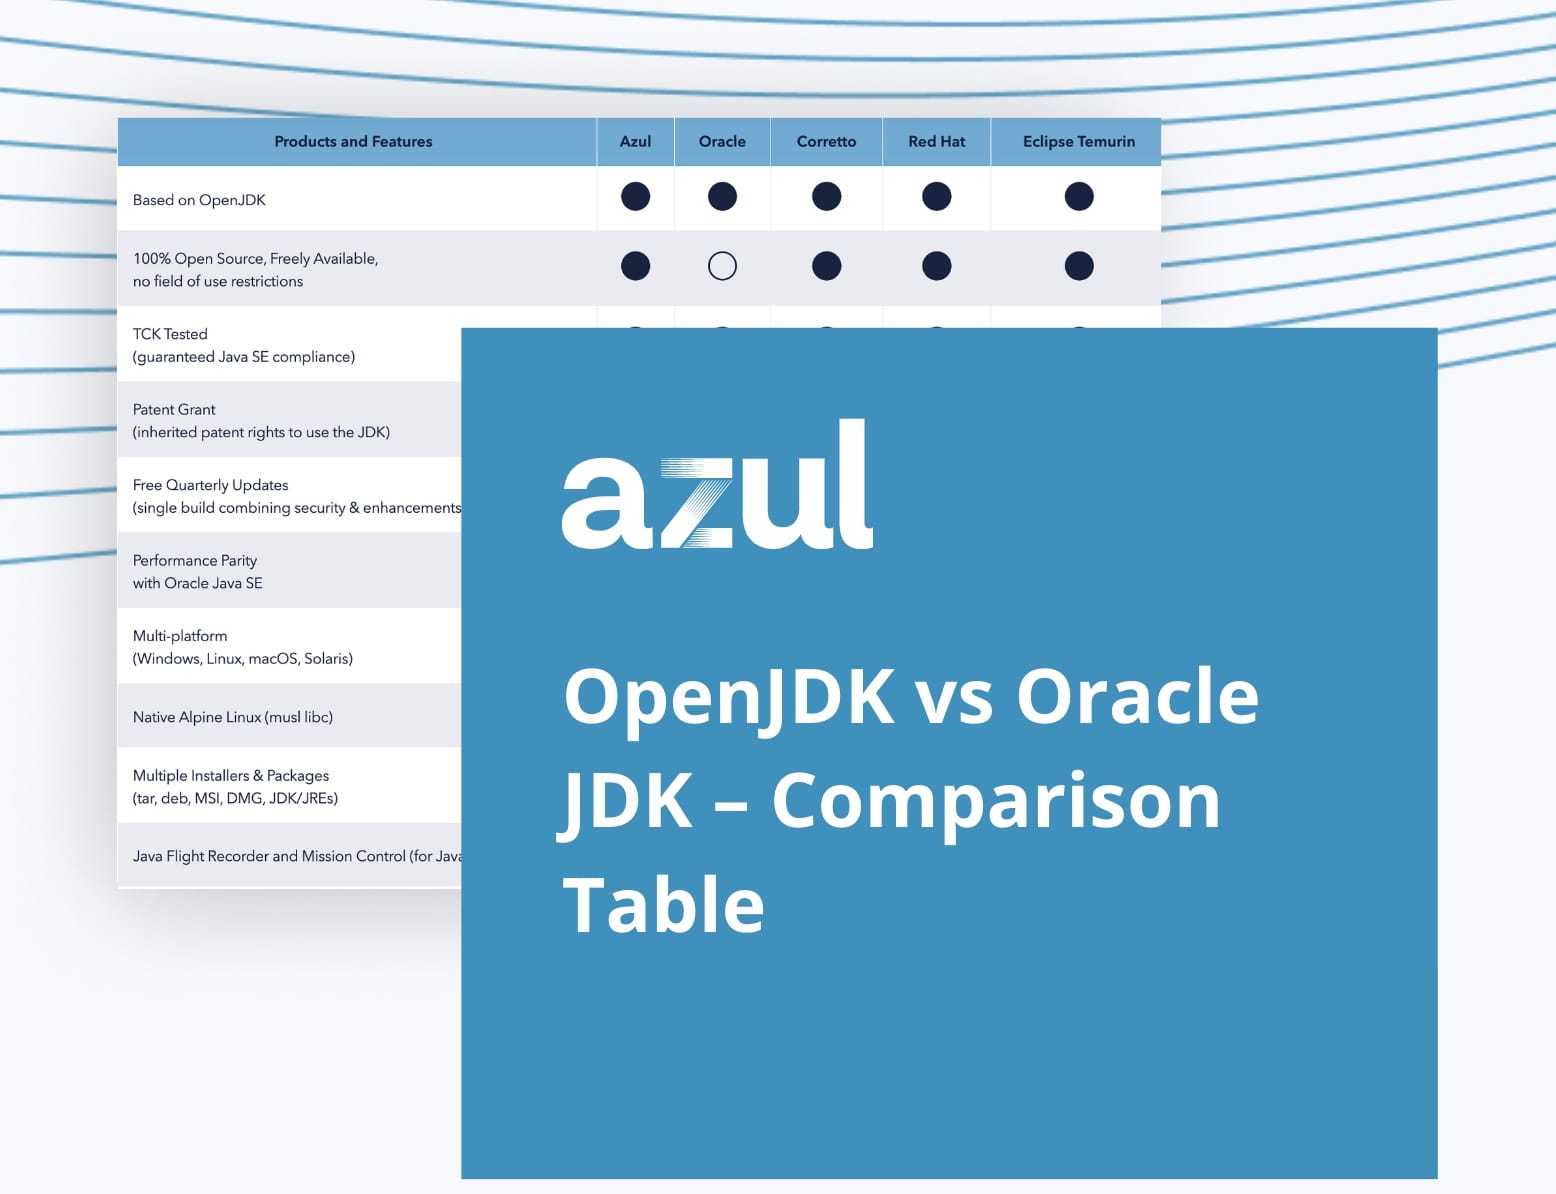 OpenJDK vs Oracle JDK – Comparison Table